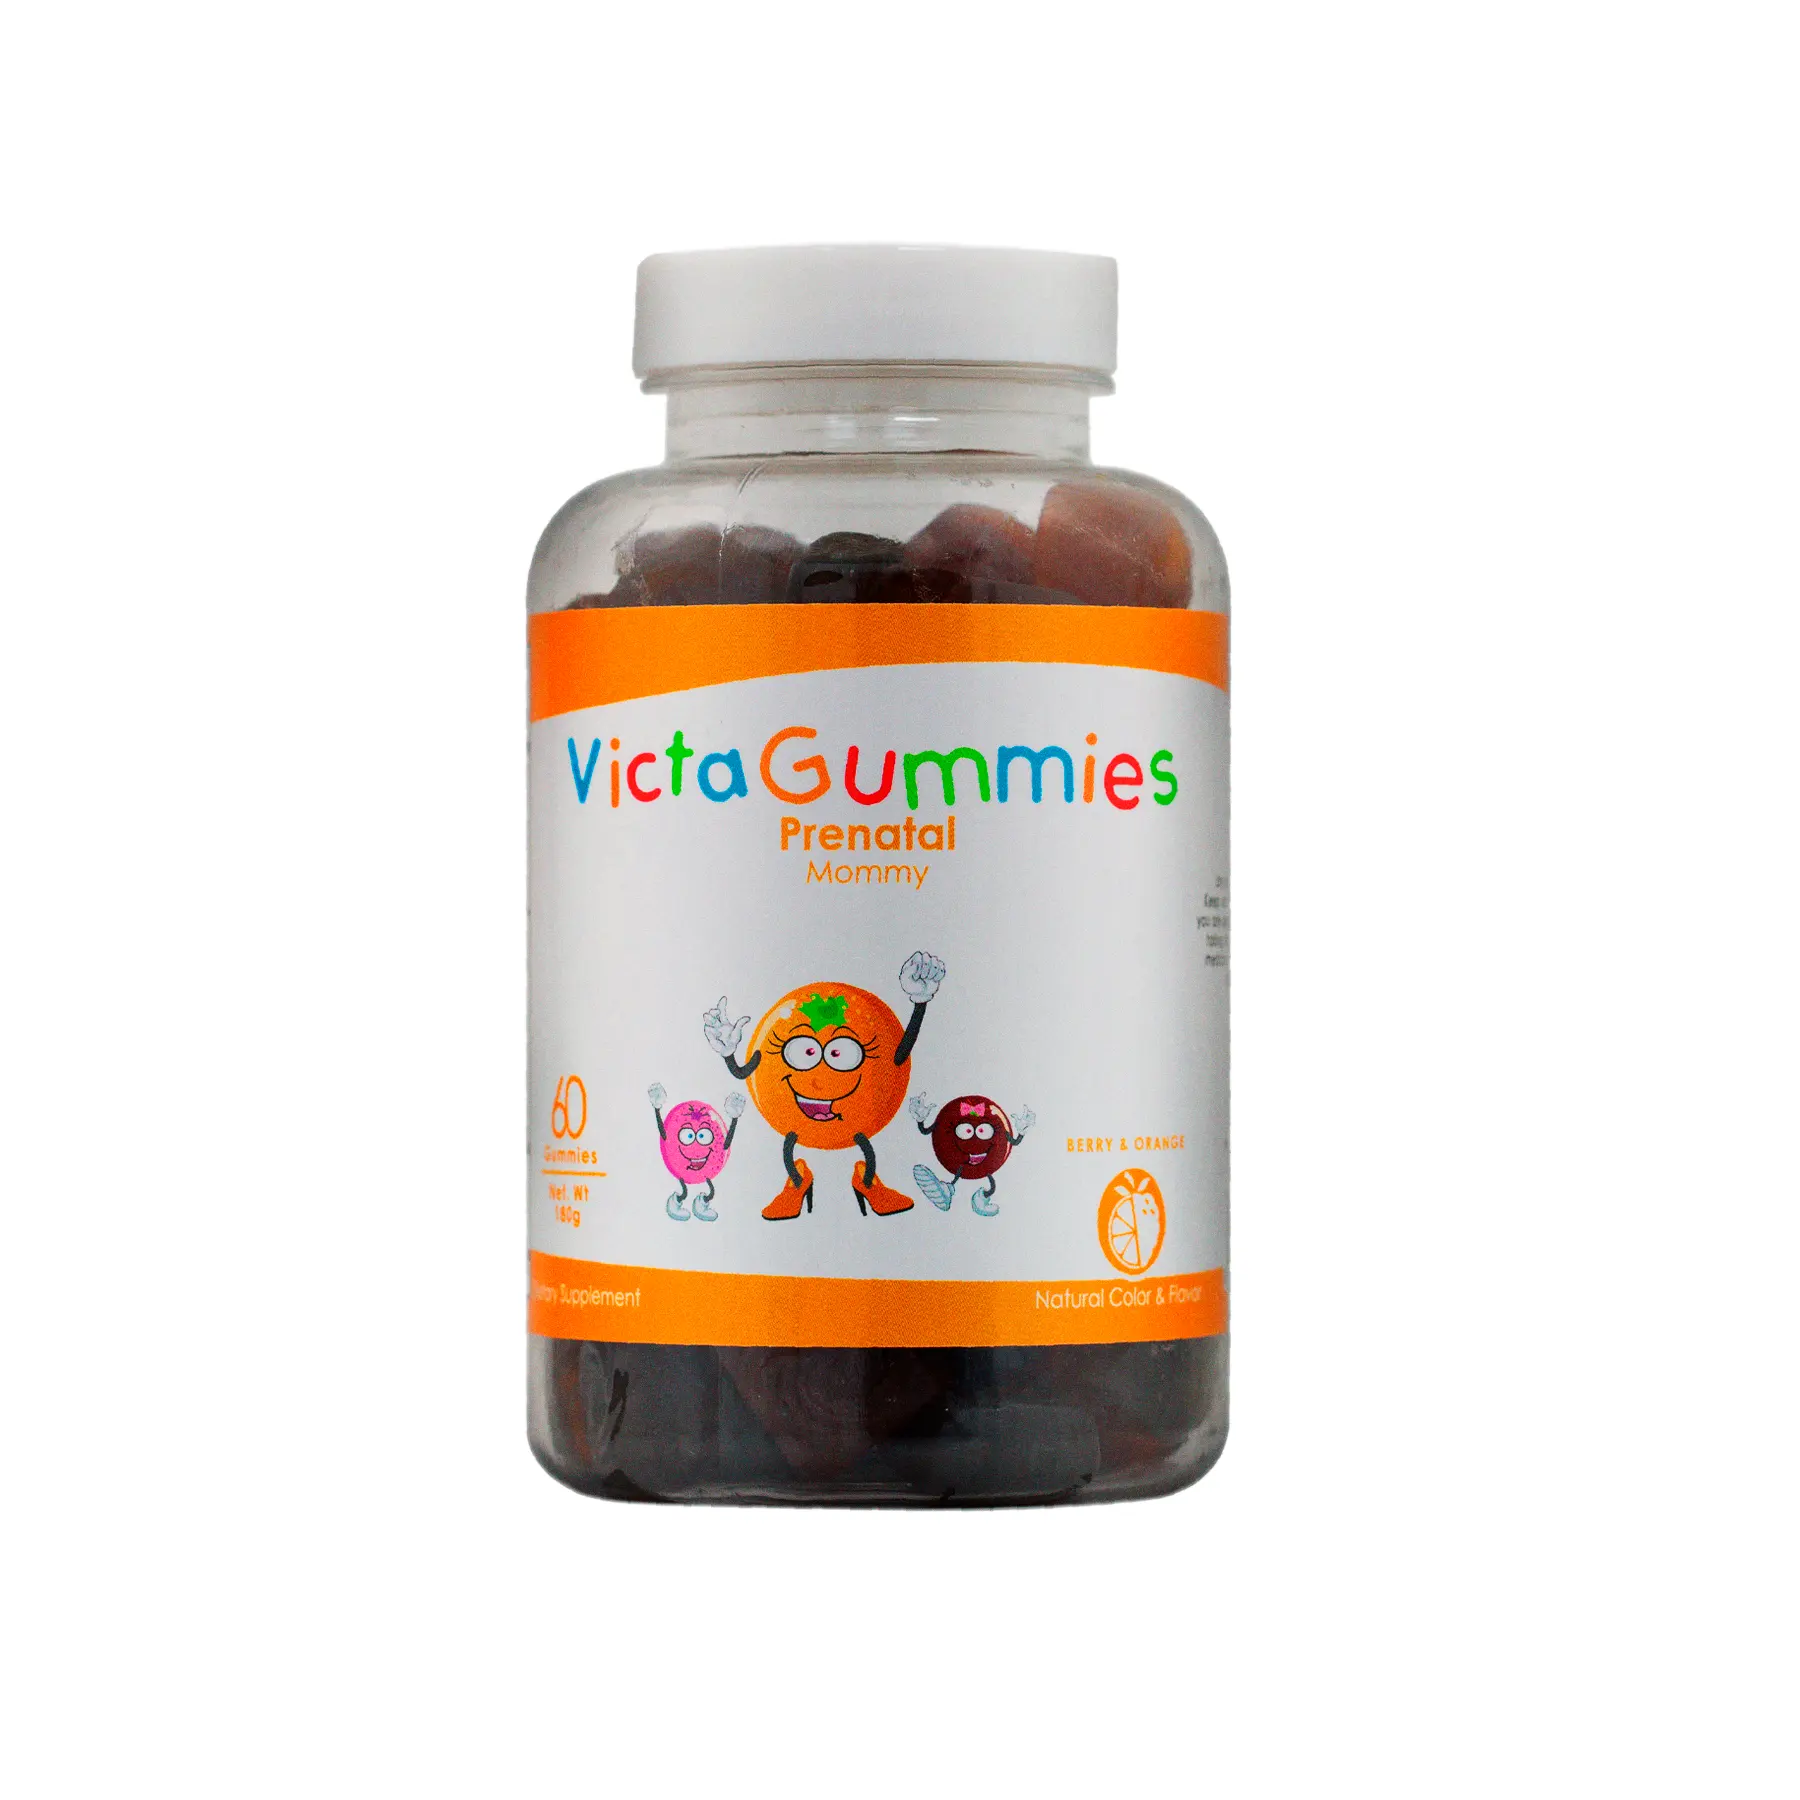 VictaGummies Prenatal 60 gummies per bottle - Food supplement for pregnant women with essential Vitamins and Minerals.